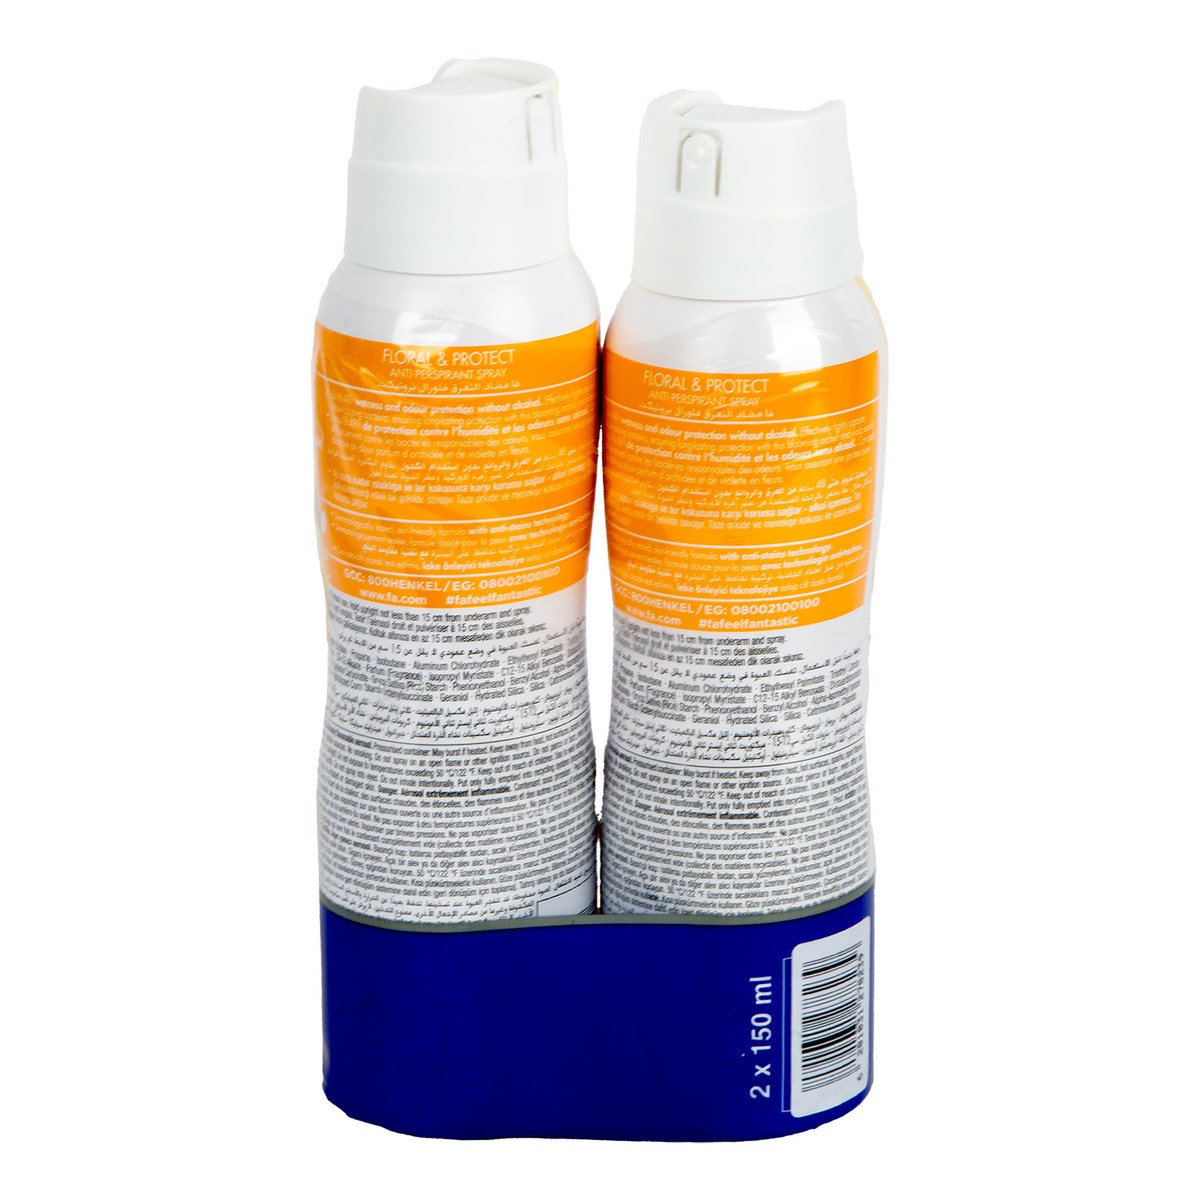 Fa Floral & Protect Deodorant Spray Value Pack 2 x 150 ml